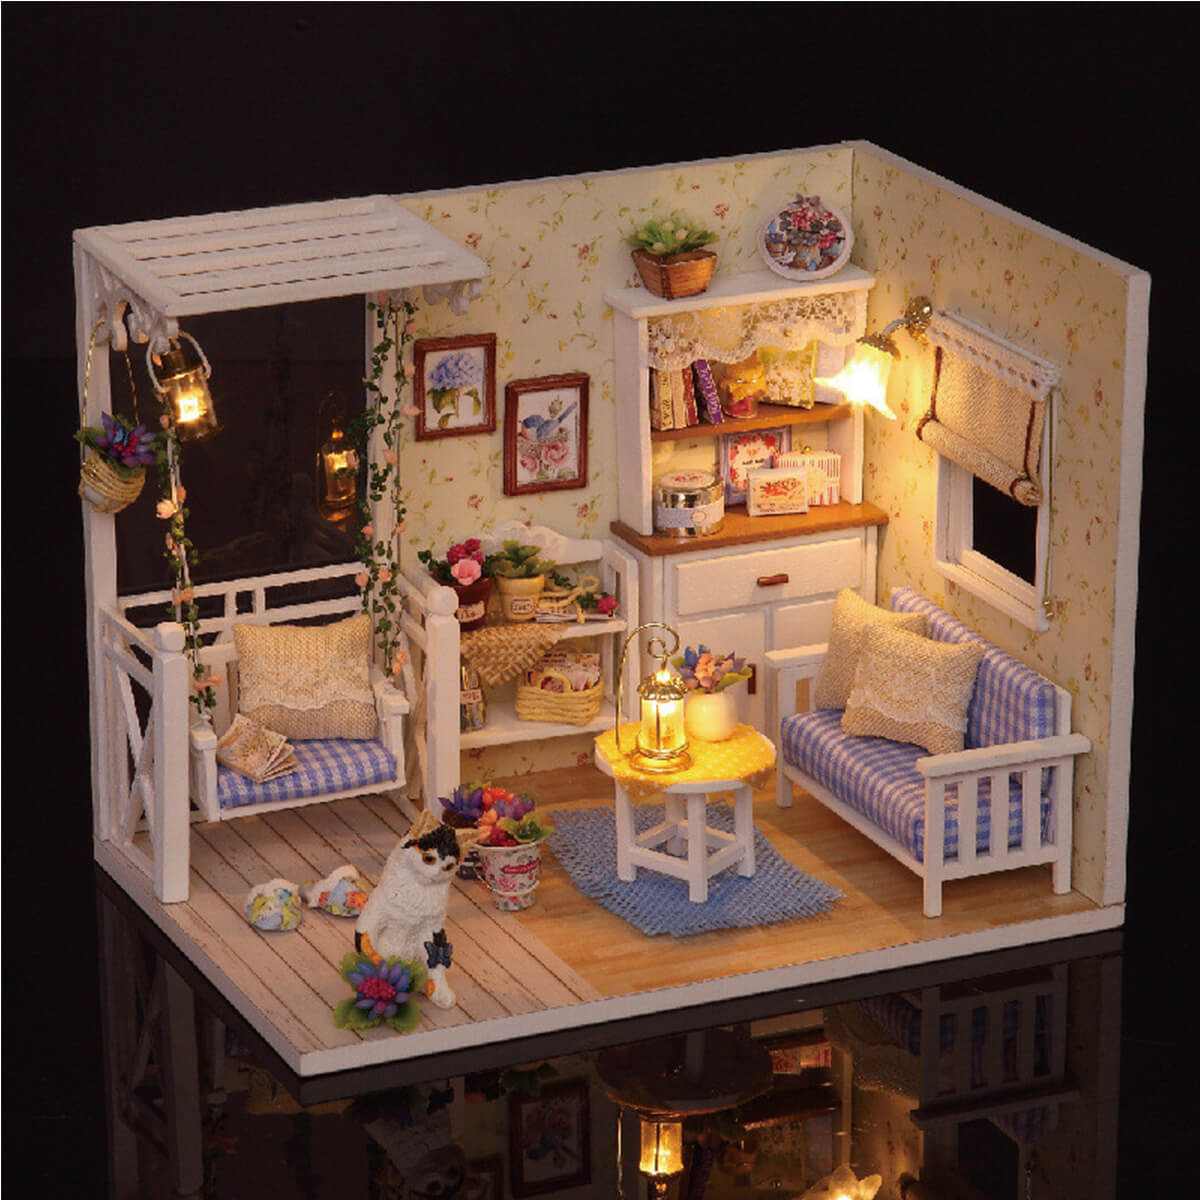 DIY Doll House Kit Build a Dollhouse With Furniture Lights Diy Miniature House Girls Best Gift